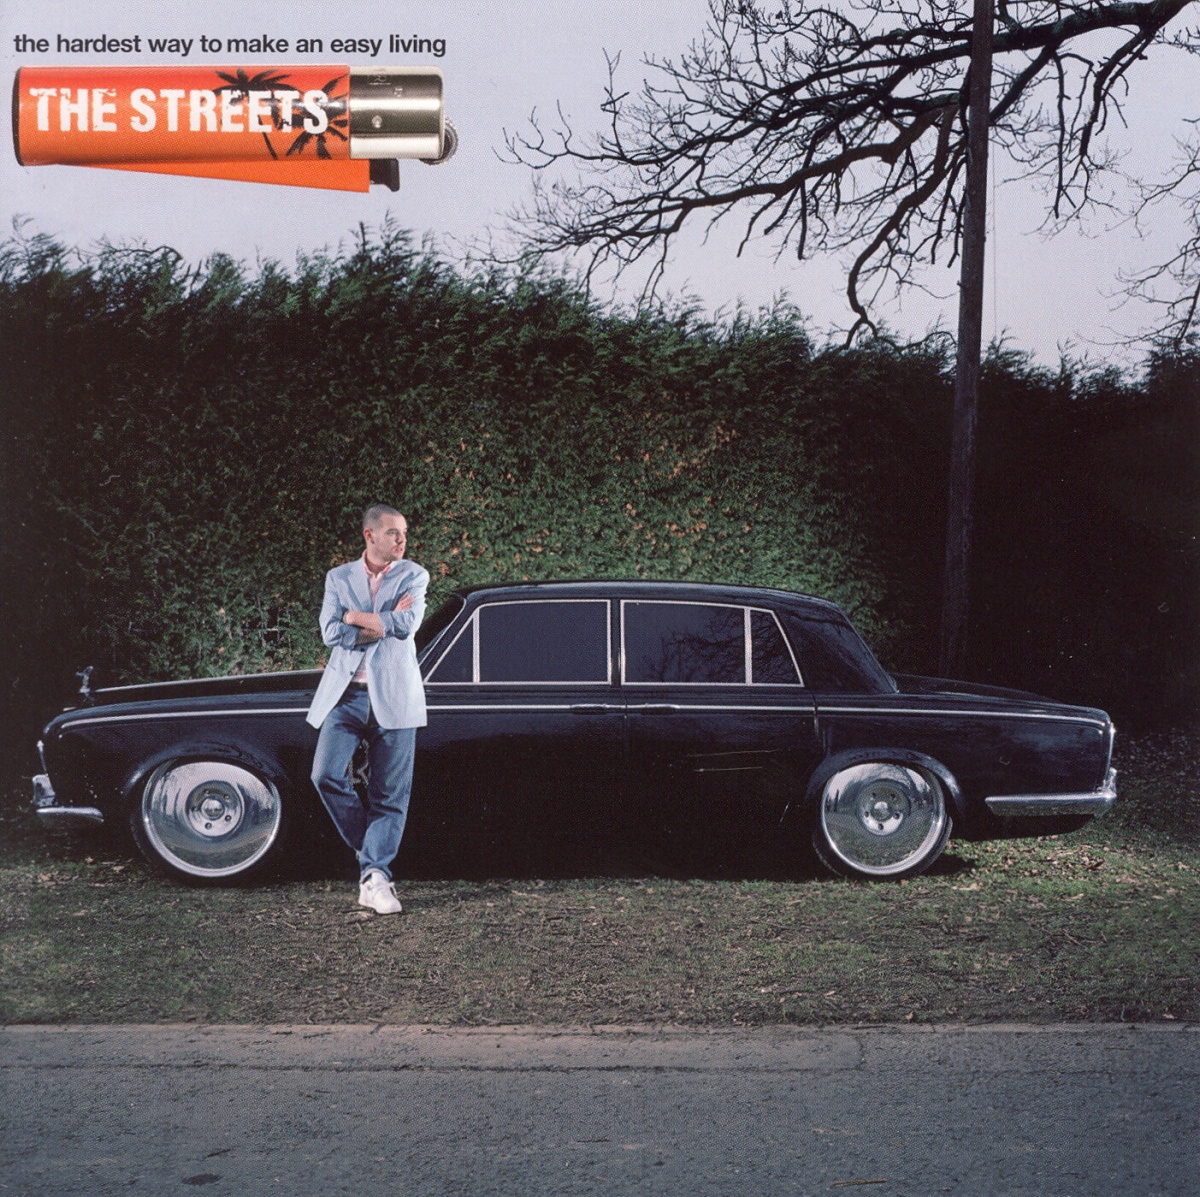 The Streets - The Hardest Way To Make An Easy Living (2006)